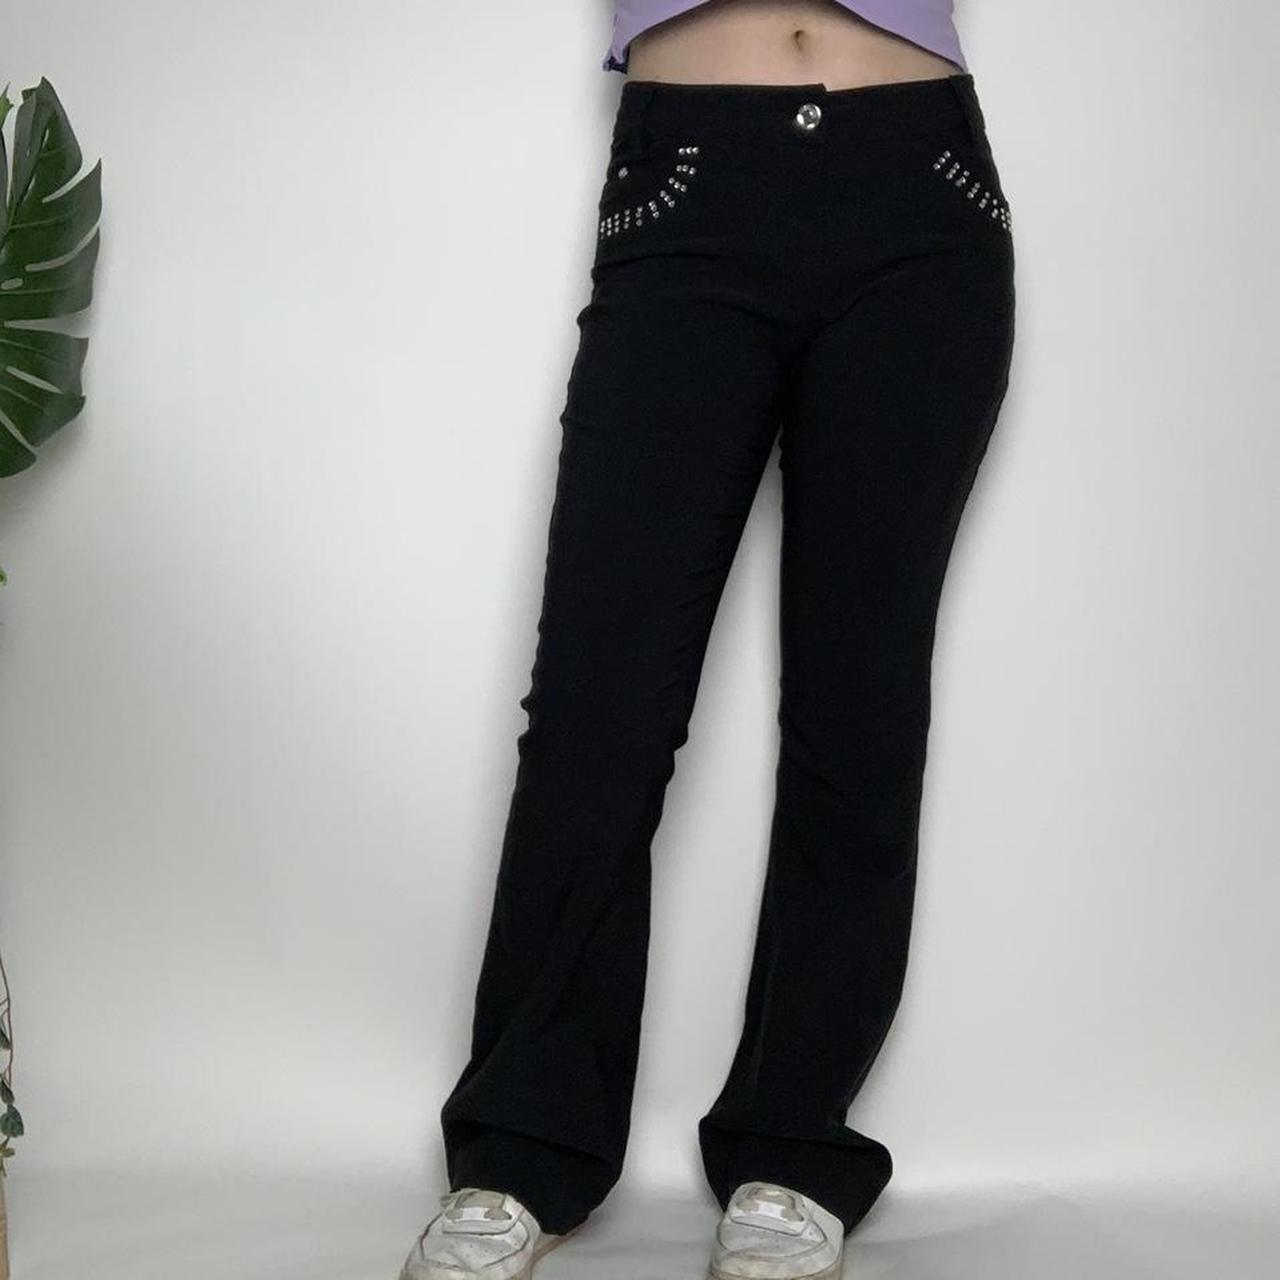 Black low-waisted bootcut vintage y2k trousers with diamante detailing